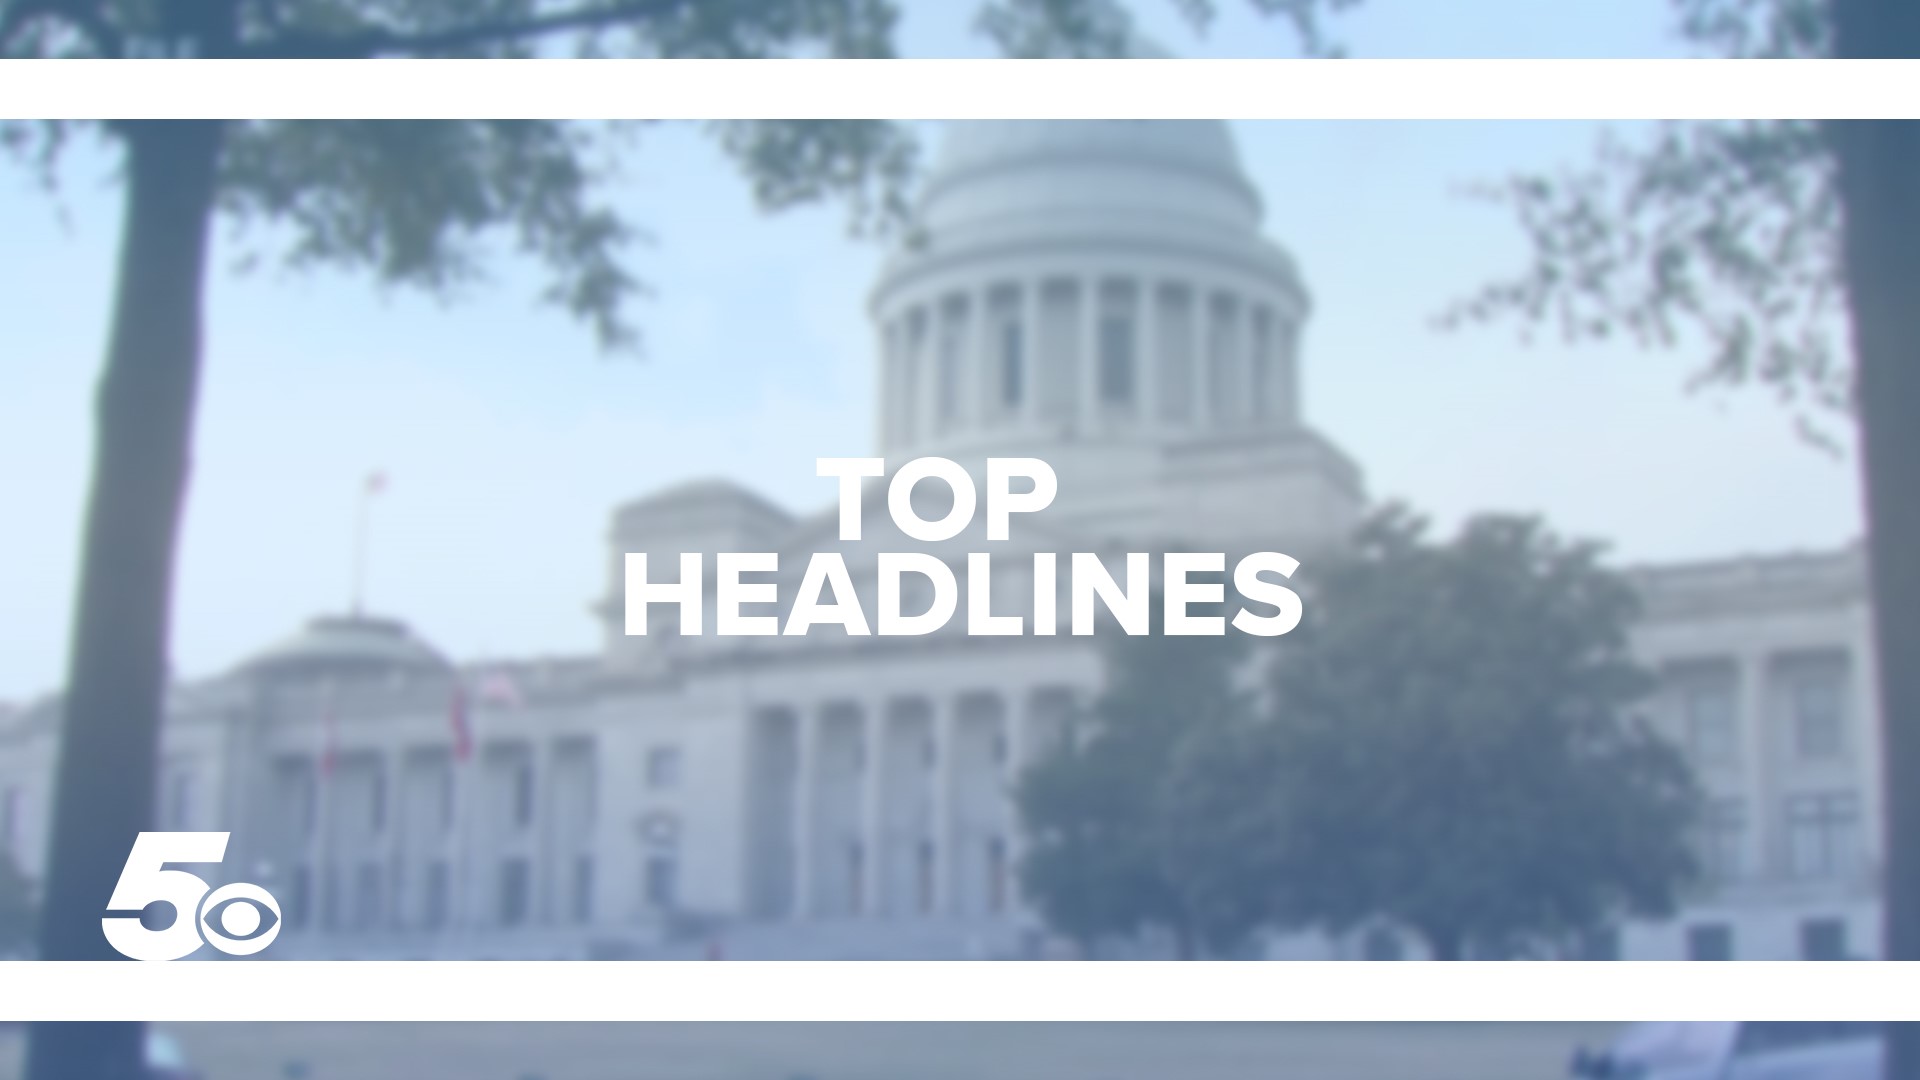 Take a look at some of today's top headlines for local news across the area!